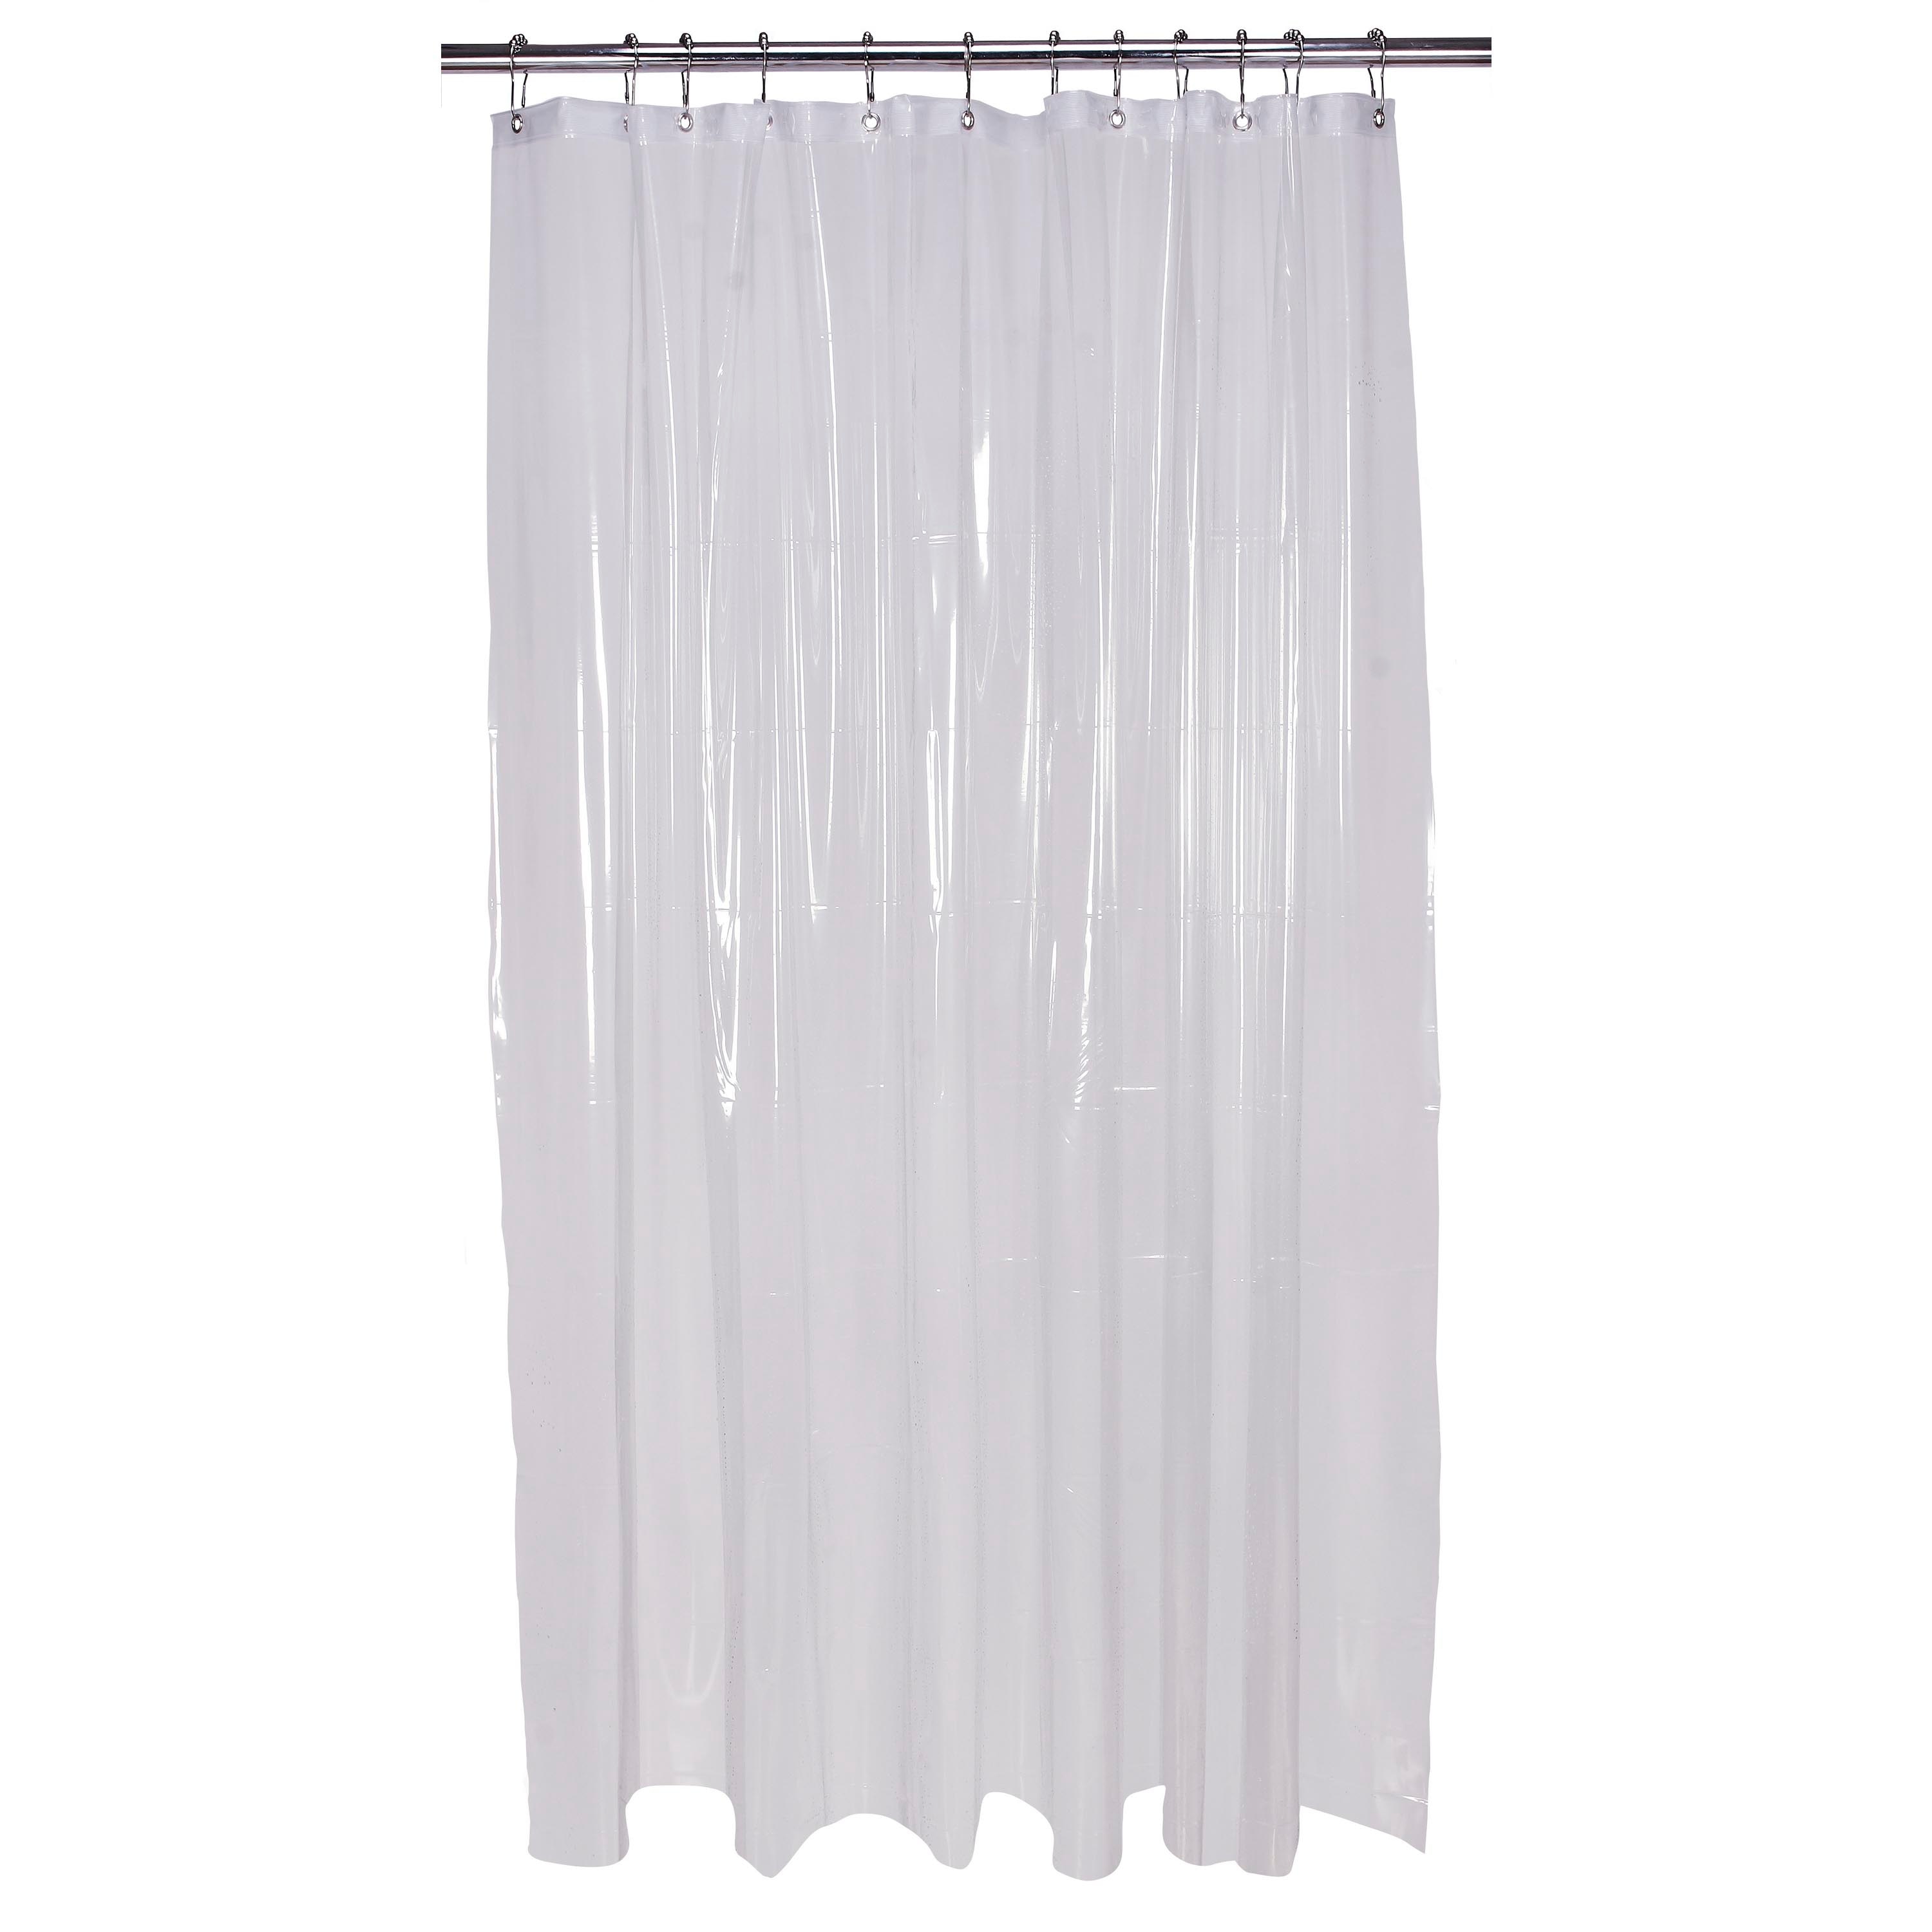 Vinyl Clear Solid Shower Liner, Long Clear Shower Curtain Liner